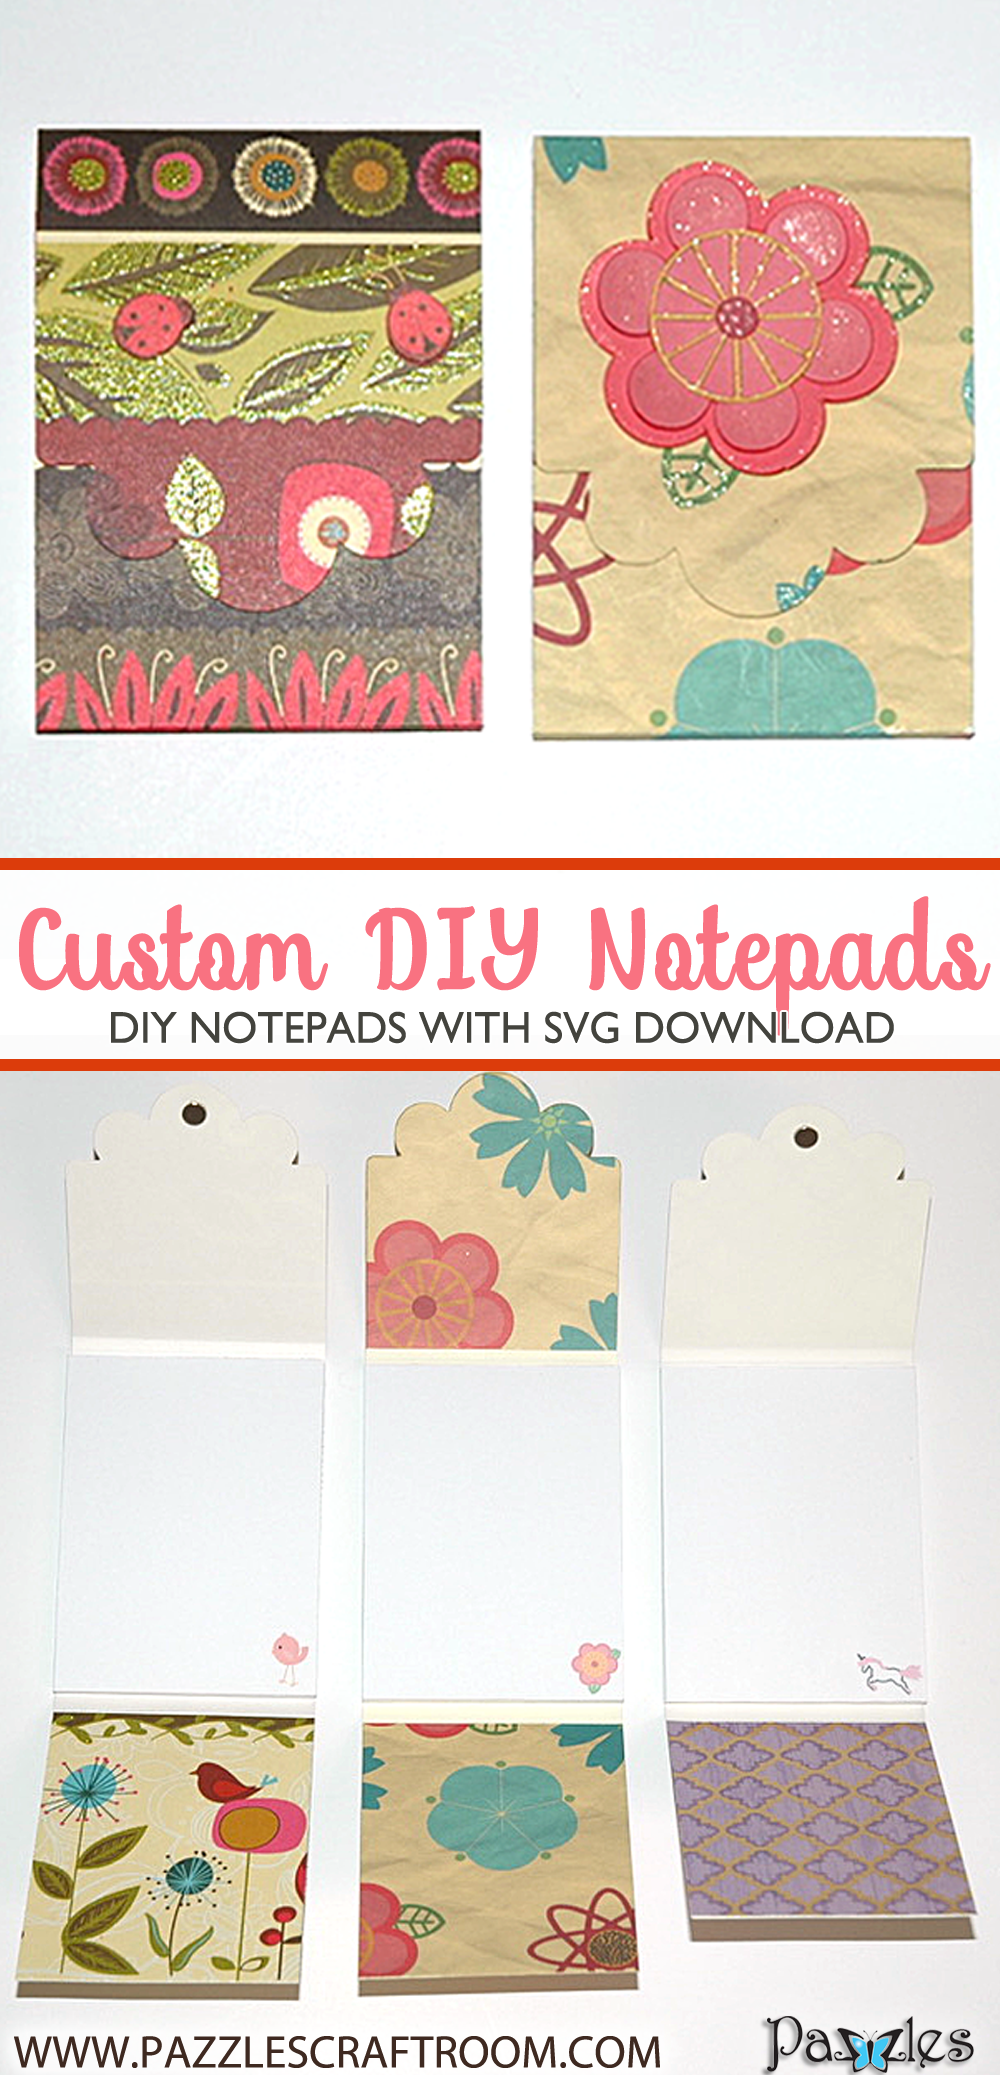 Pazzles DIY Custom Notepads with instant SVG download. Compatible with all major electronic cutters including Pazzles Inspiration, Cricut, and Silhouette Cameo. Design by Judy Hanson.